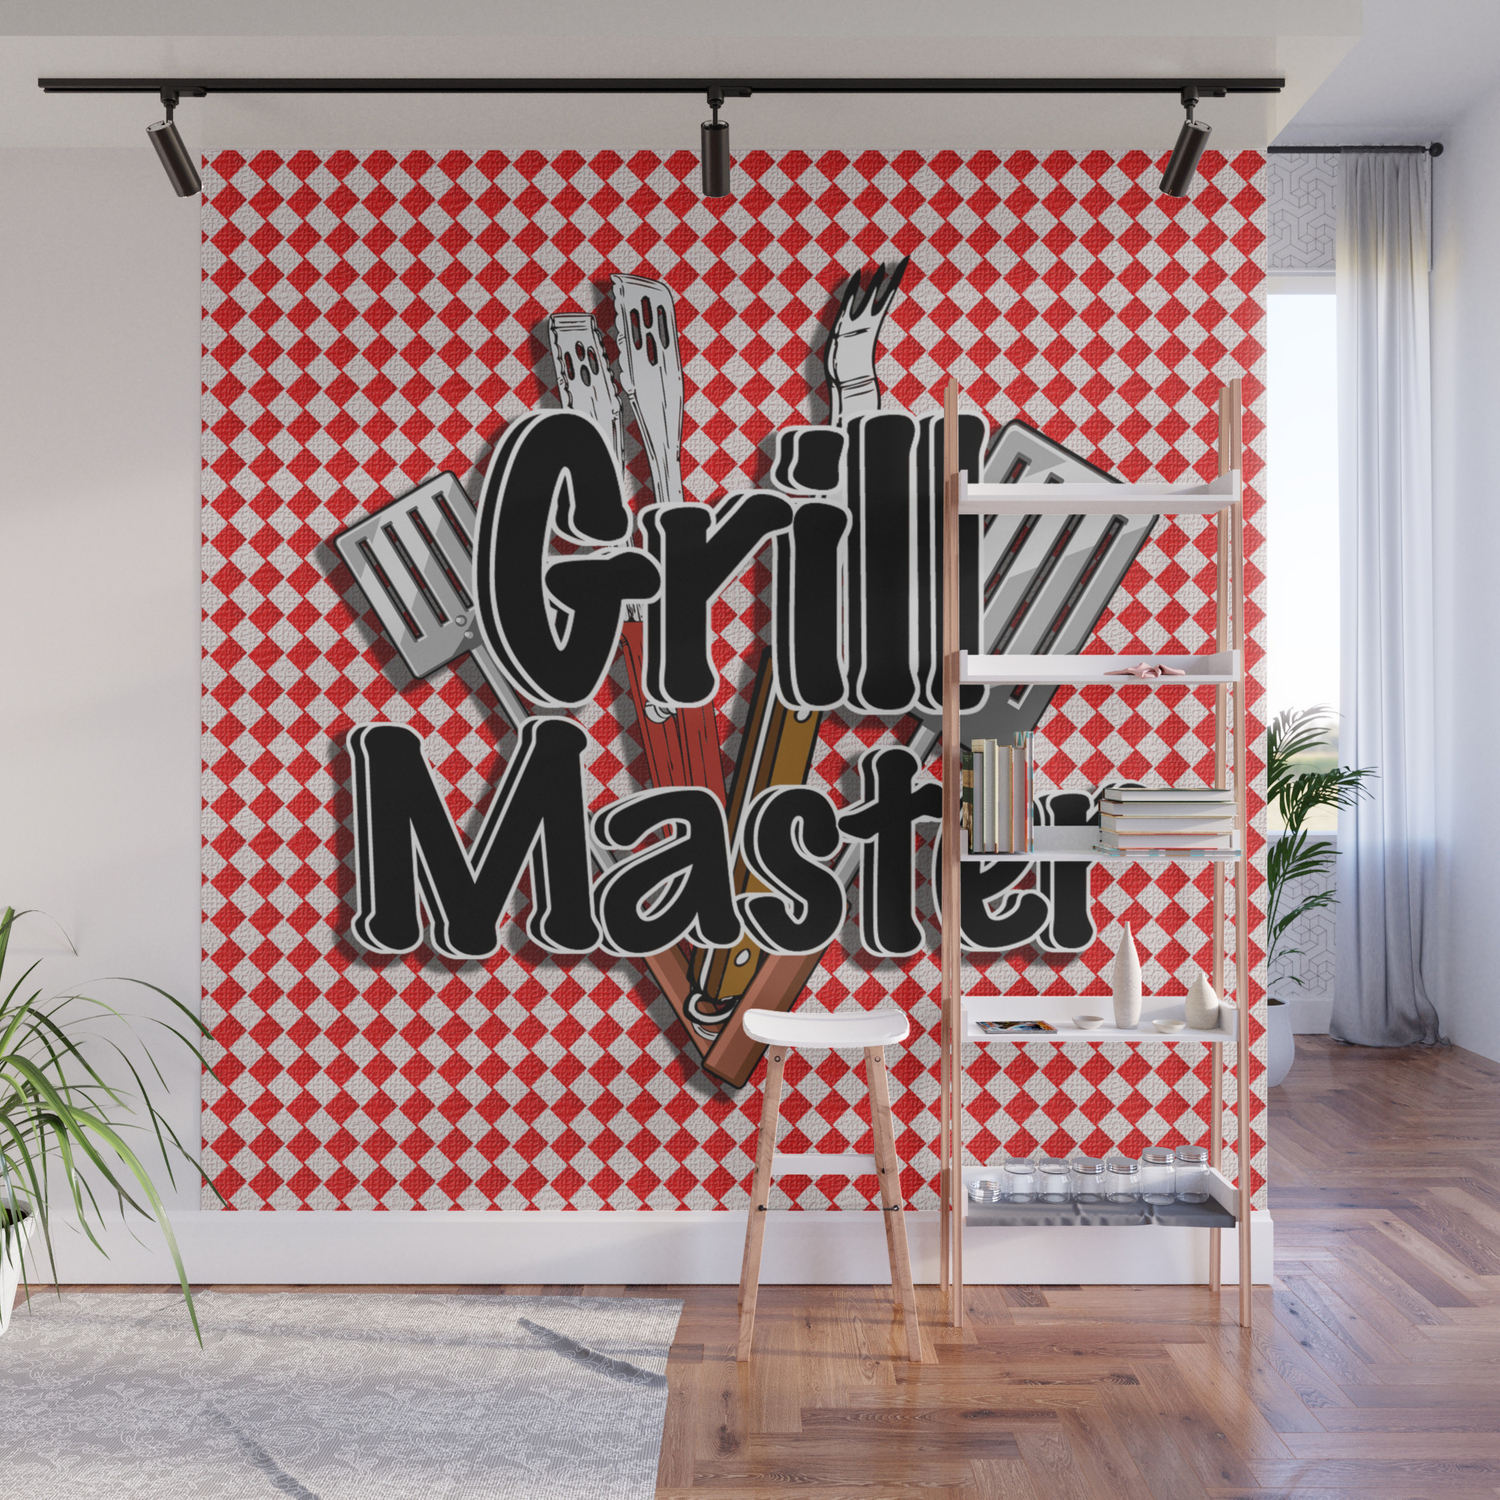 Grill Master With Bbq Tools Wall Mural By Gx9designs Society6